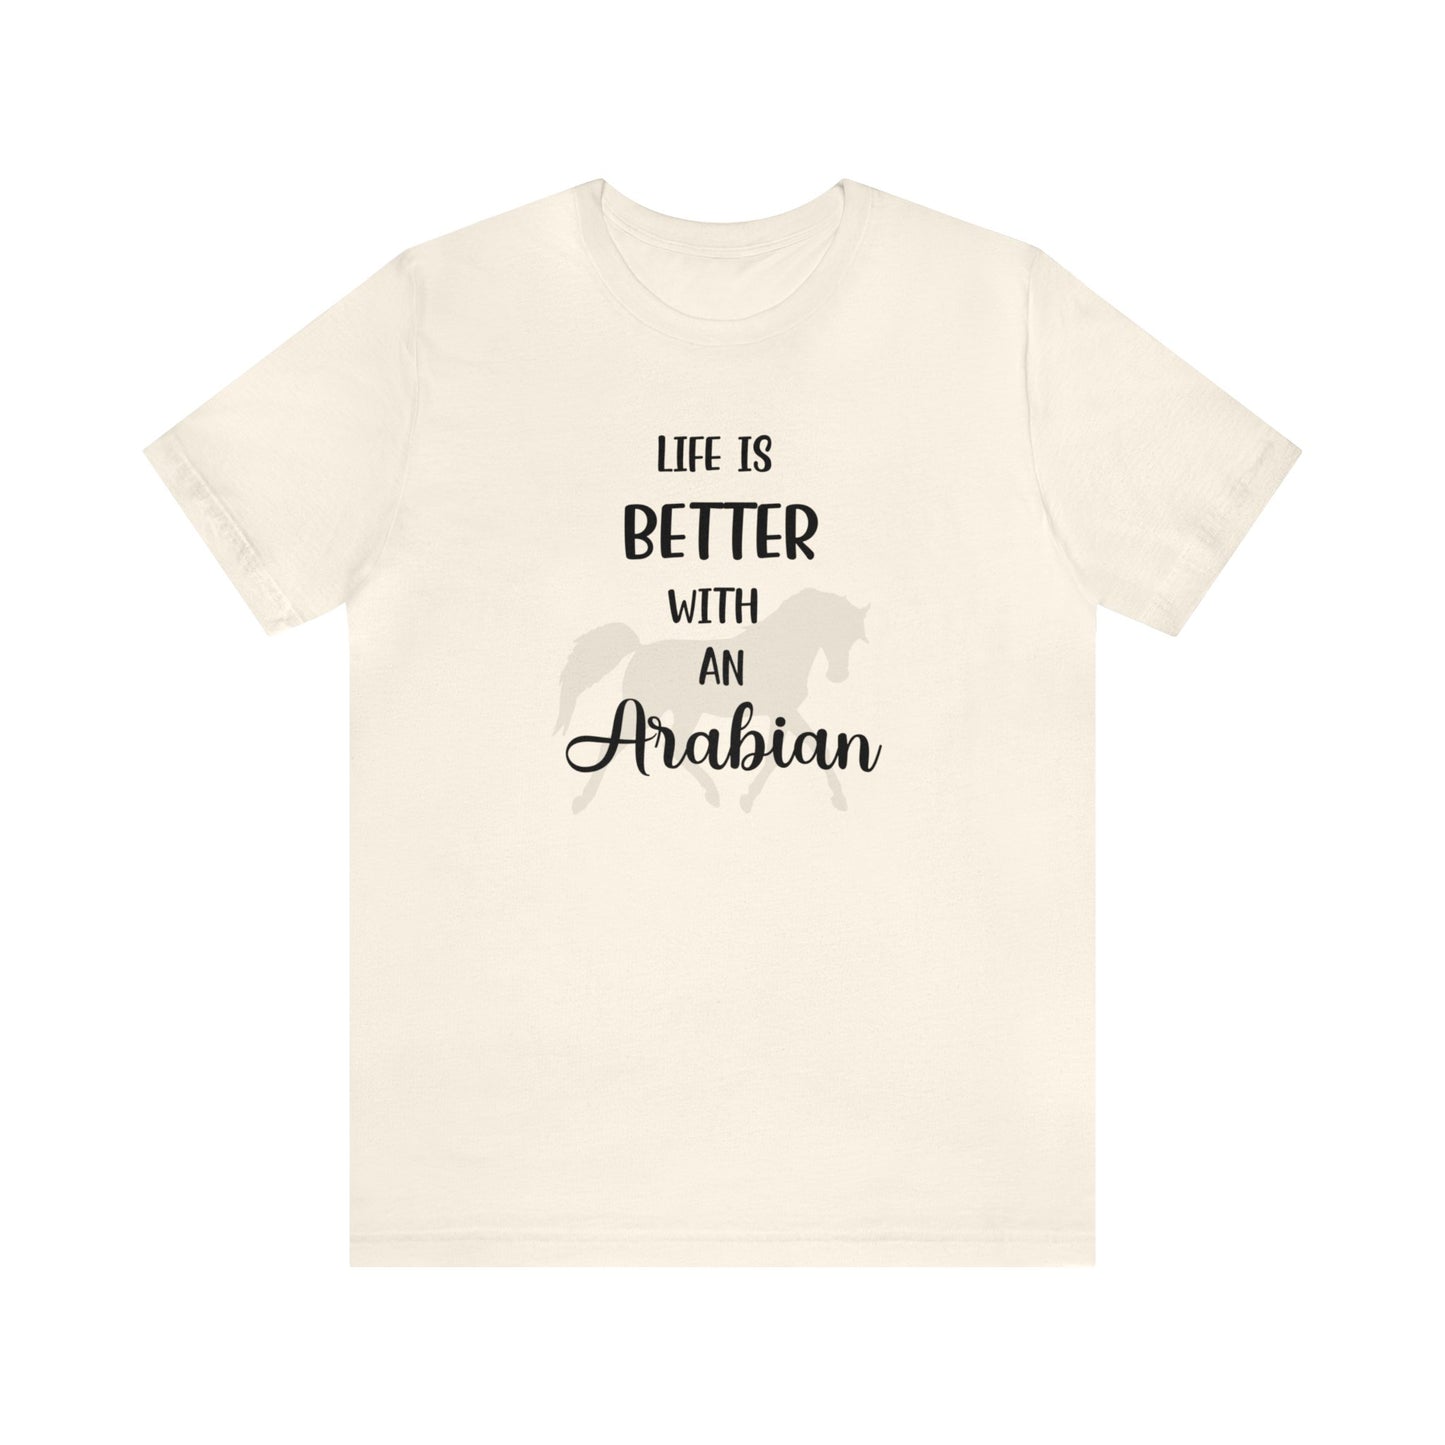 Life Is Better with an Arabian T-shirt